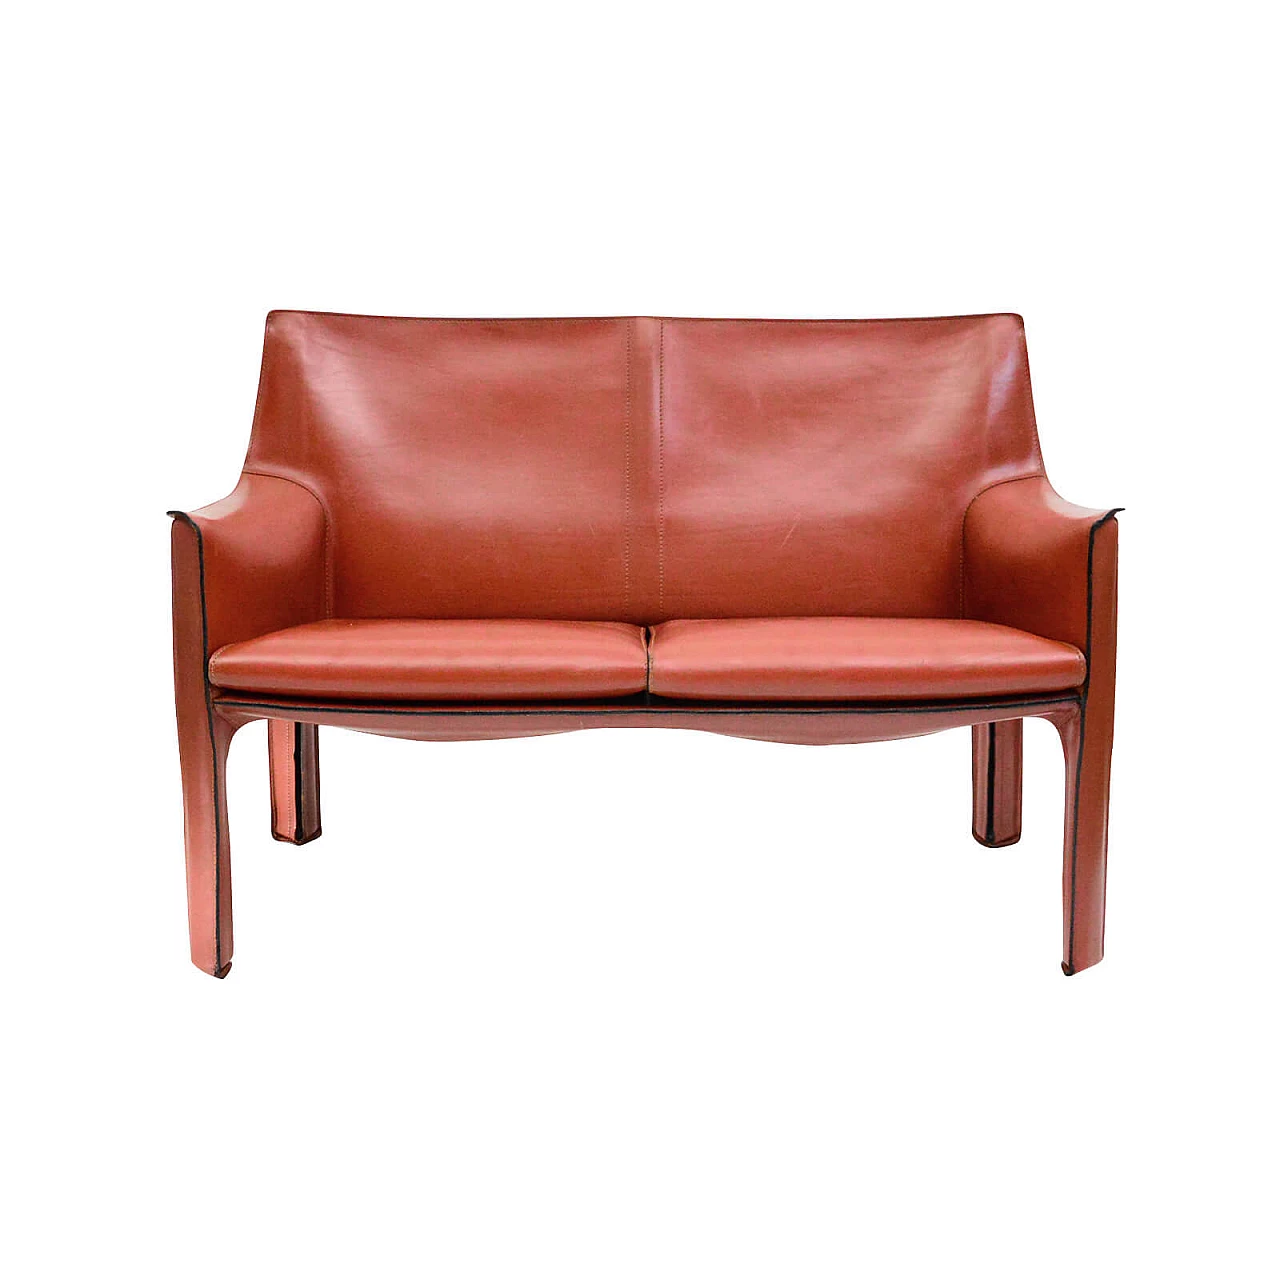 CAB 414 two-seater leather sofa by Mario Bellini for Cassina, 70s 1262620